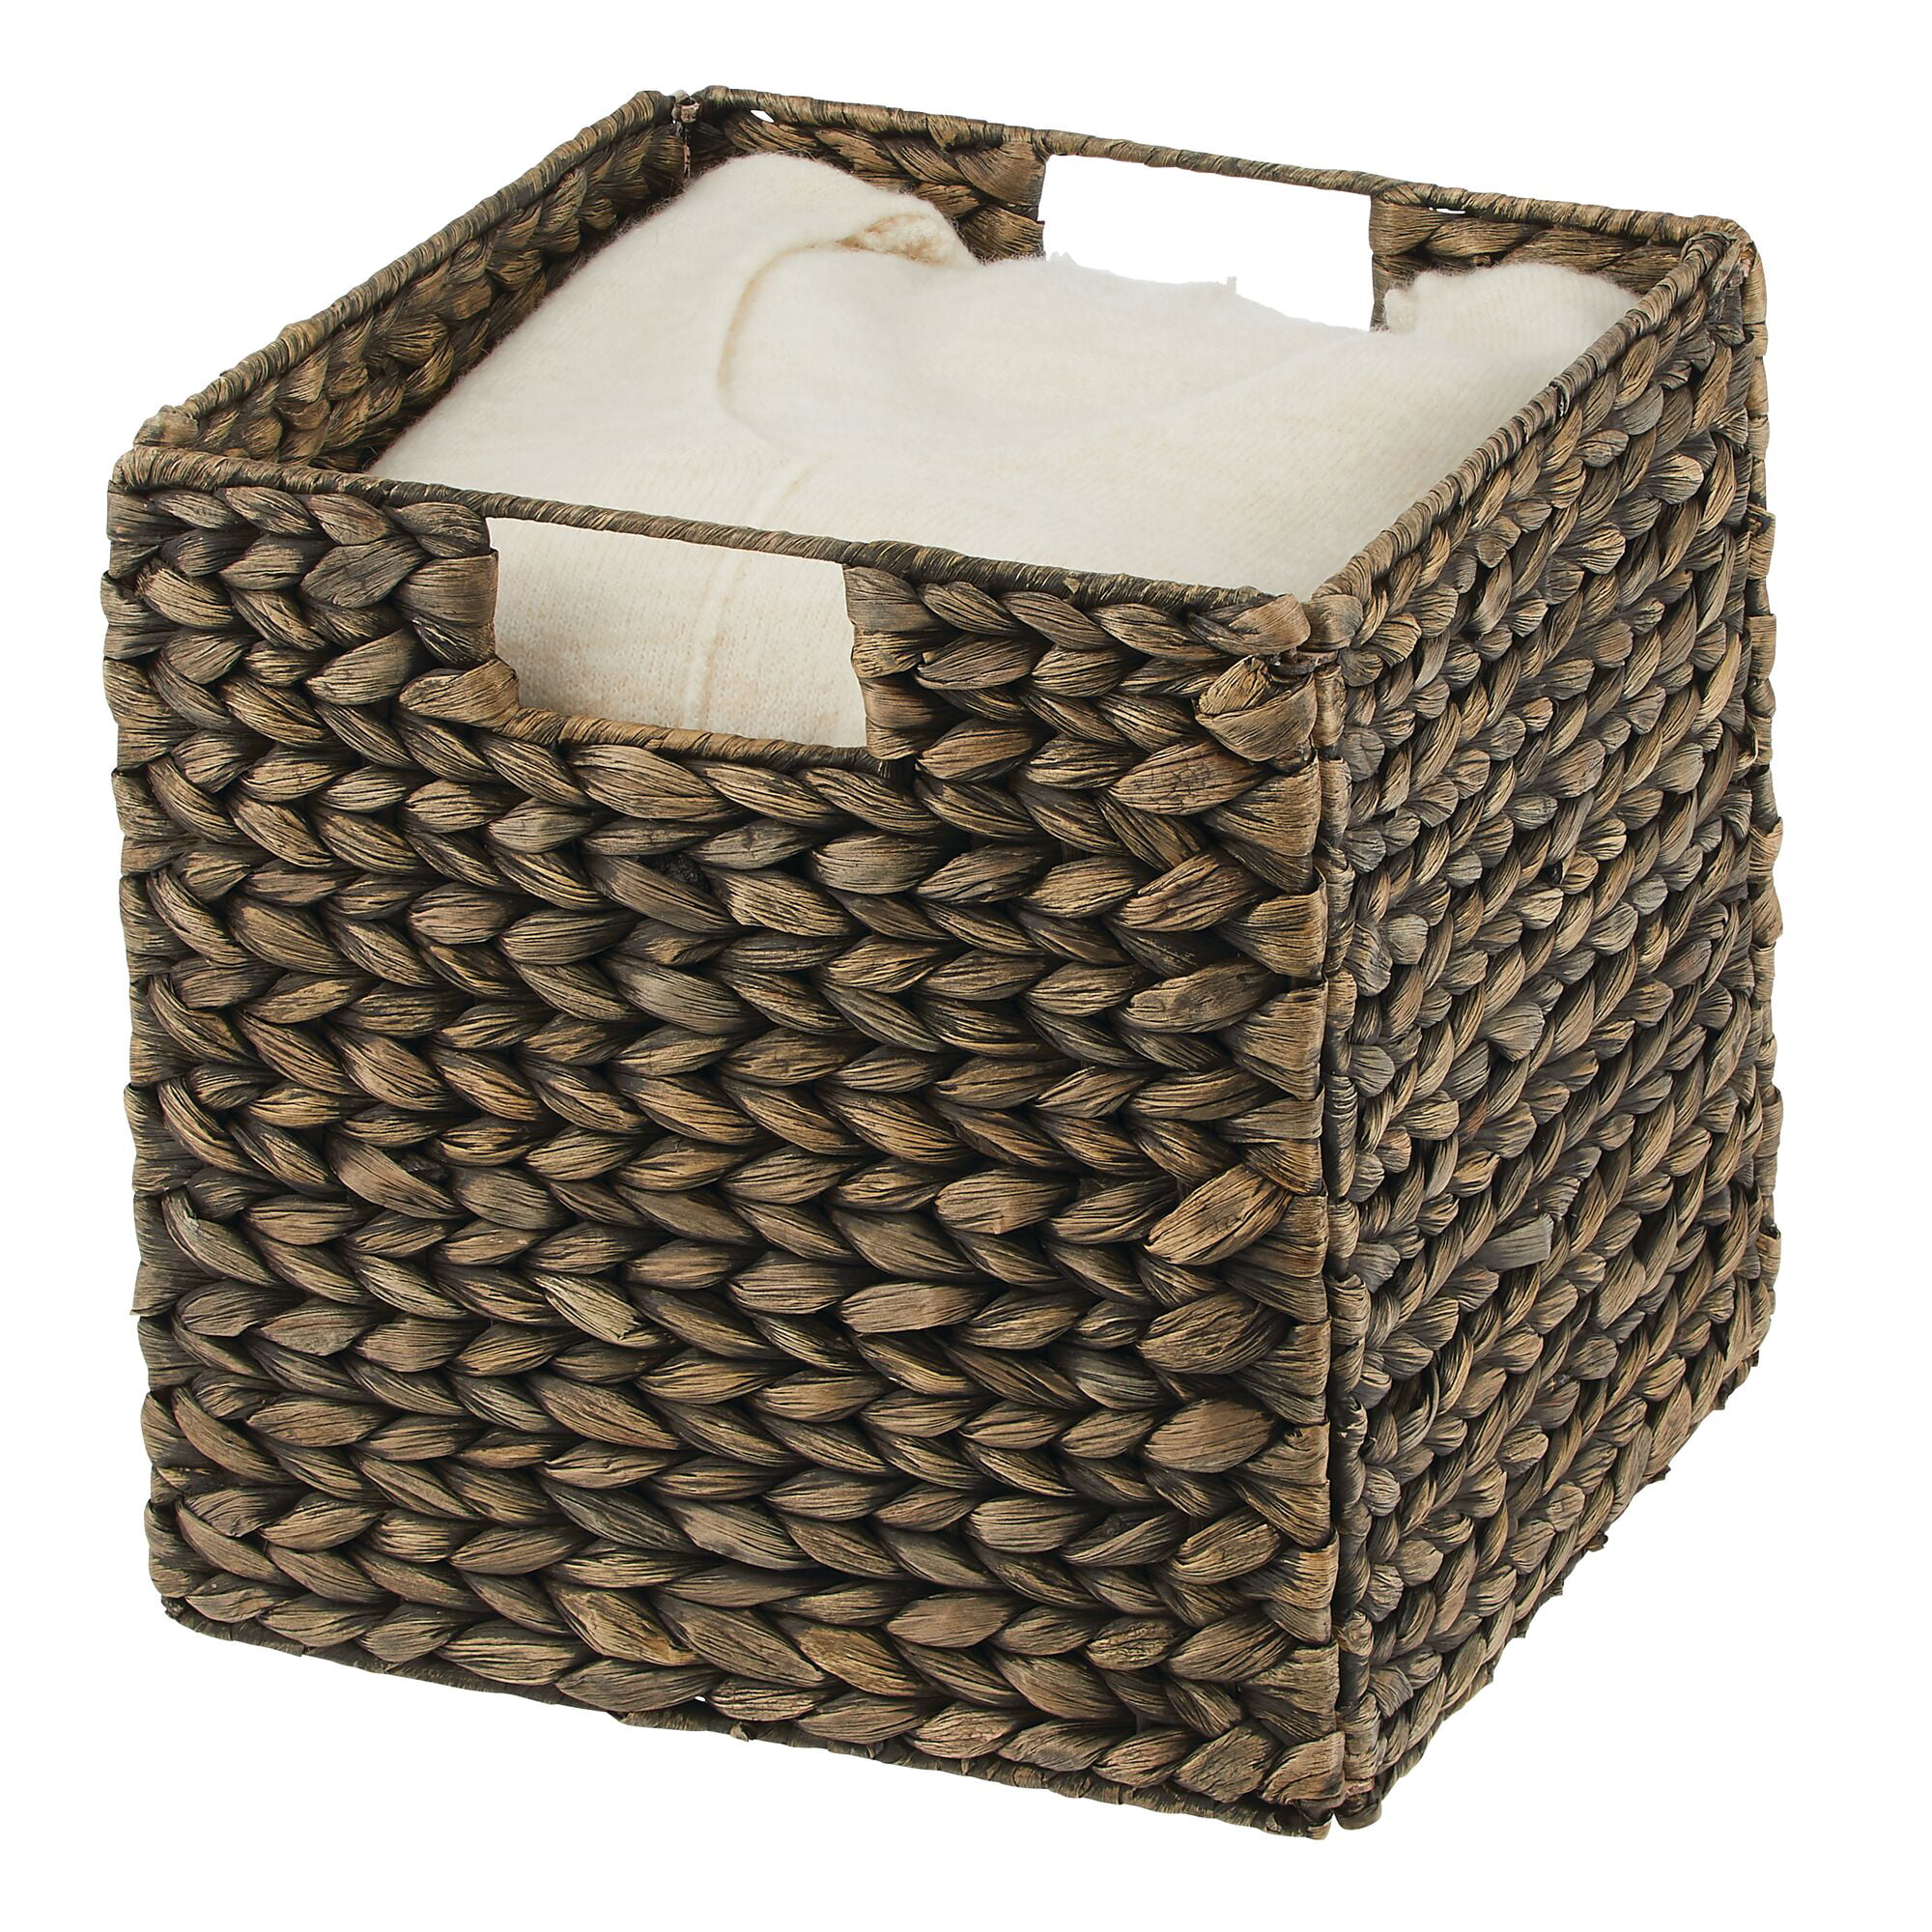 mDesign Woven Hyacinth Home Storage Basket for Cube Furniture, 4 Pack - Natural